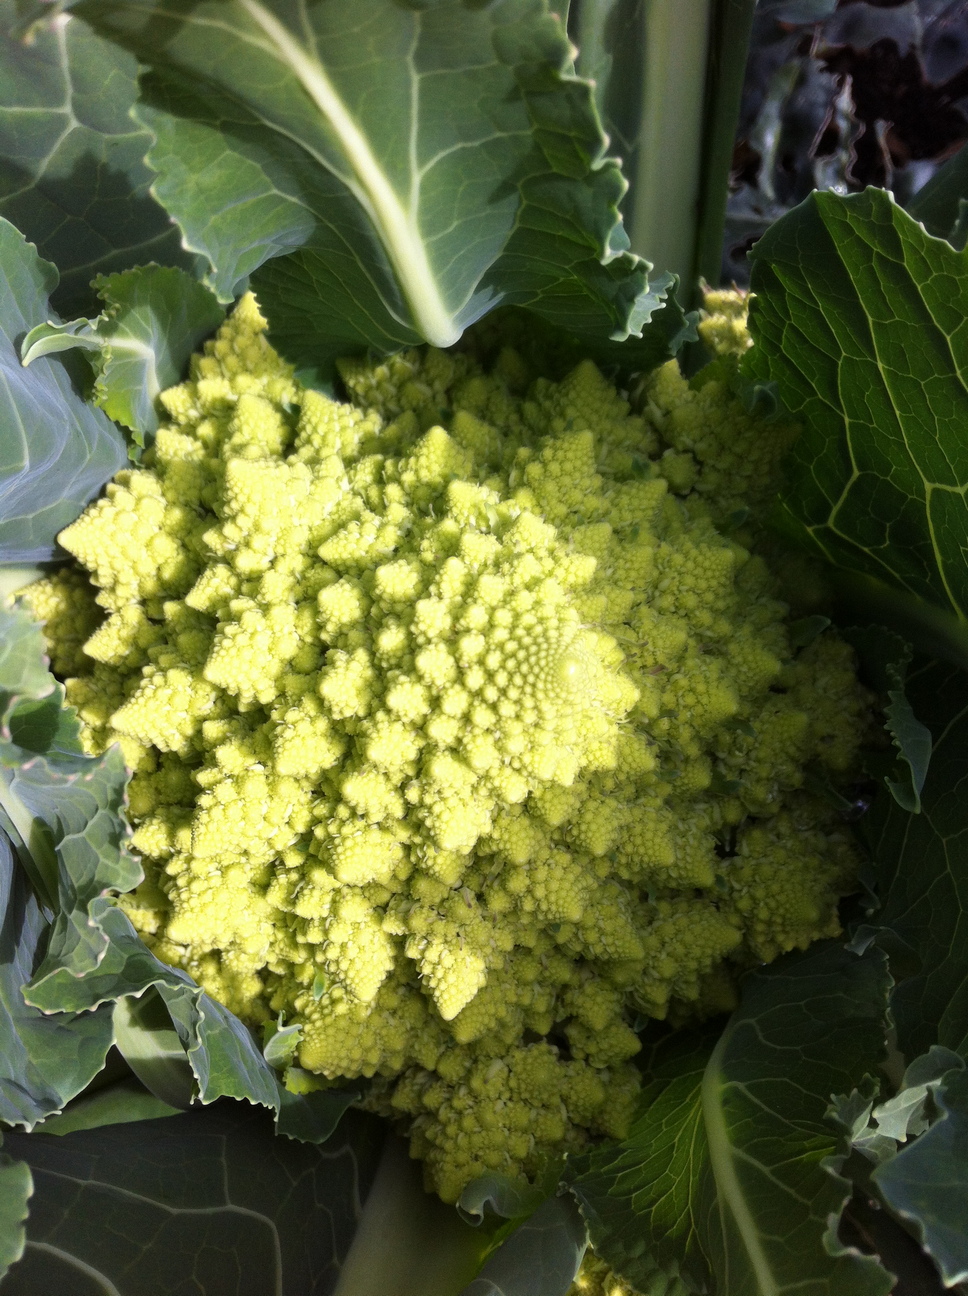 Romanesco Broccoli. I love how this plant looks with its pointy spires of fractal patterns, and it tastes great. Flavour and texture is a cross between broccoli and cauliflower.